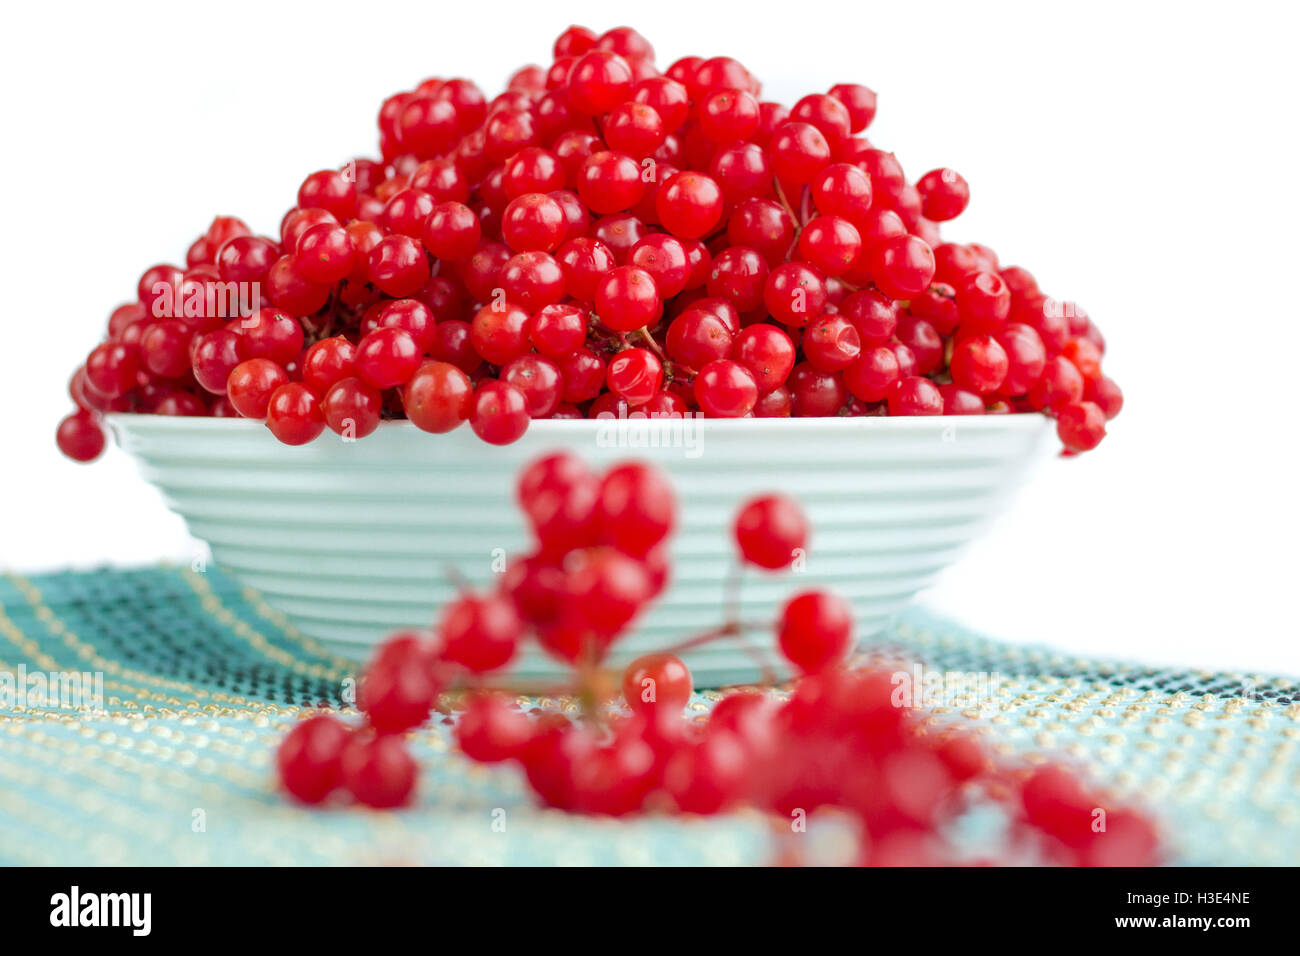 Red berries of guelder rose isolated in white plate with dropped-out cluster on blue underlay Stock Photo